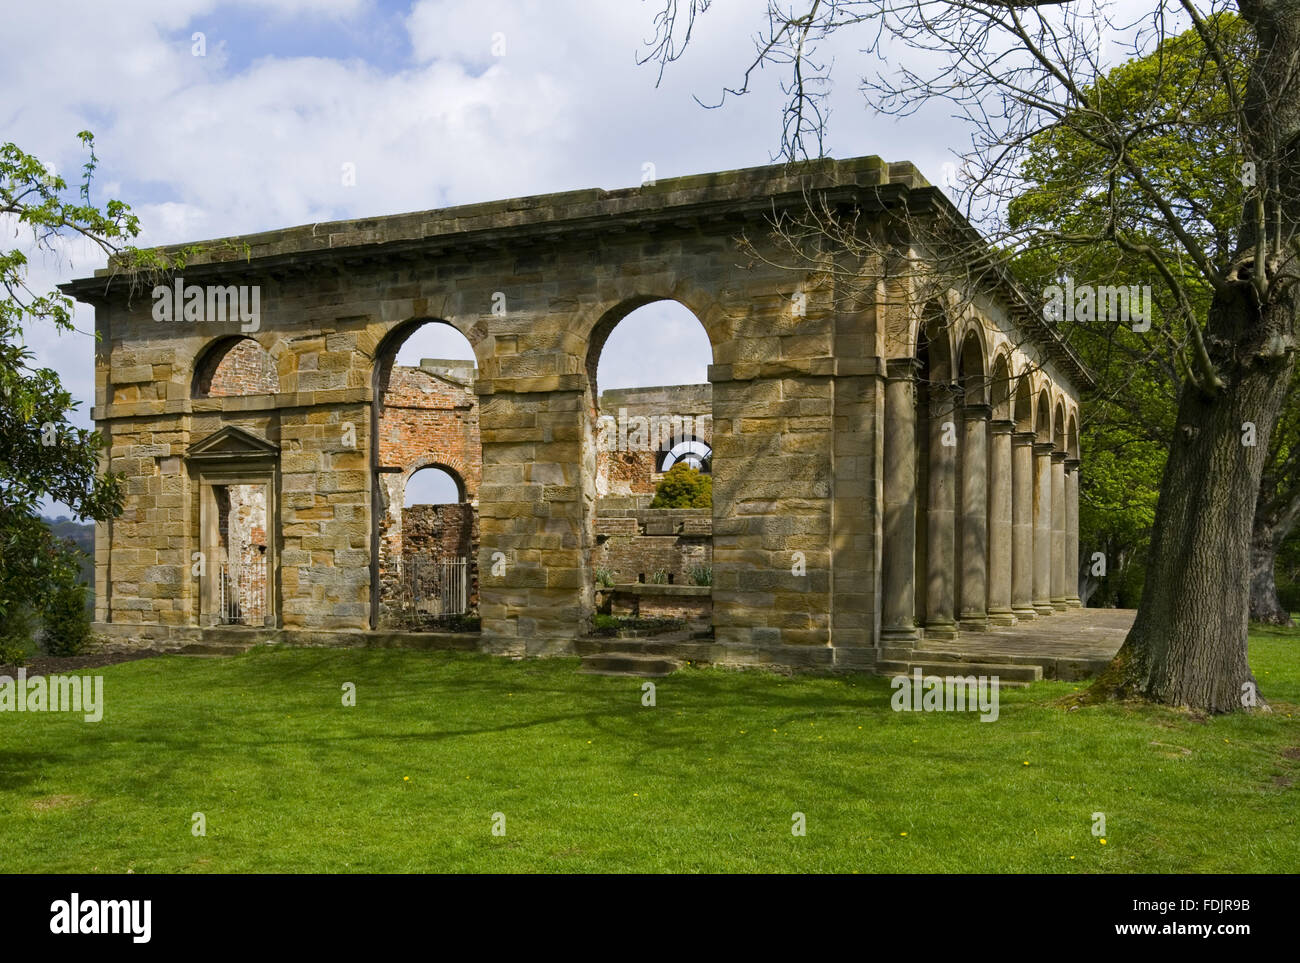 The Orangery, which was begun in 1772 to a design attributed to James Paine, at Gibside, Newcastle upon Tyne. George Bowes inherited the estate in 1722 and landscaped the grounds and created buildings around Gibside Hall. Stock Photo